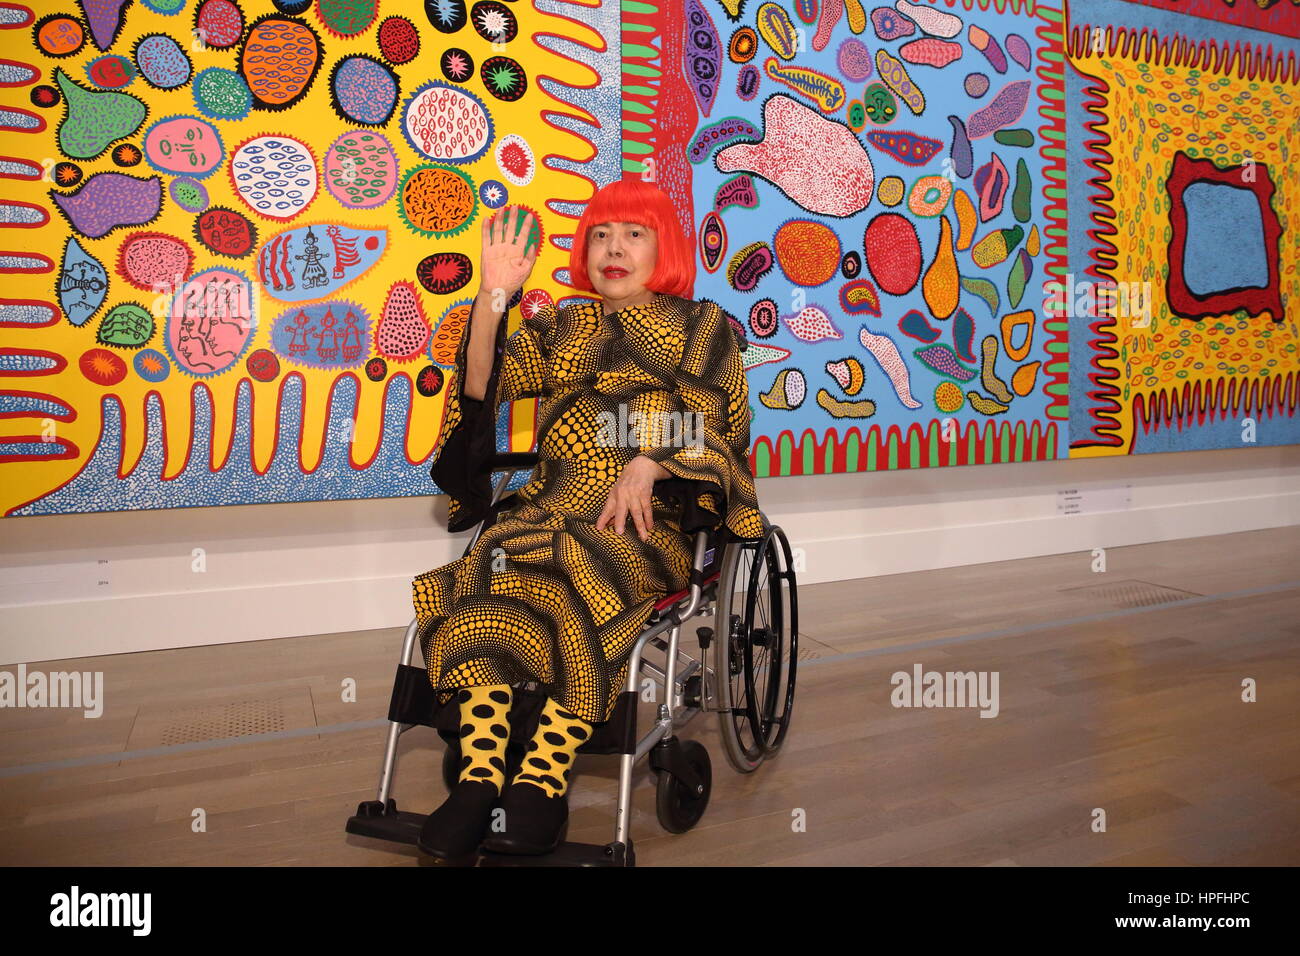 Tokyo, Japan. 21st Feb, 2017. Japanese artist Yayoi Kusama attends the exhibition of 'Yayoi Kusama: My Eternal Soul' during press preview day at The National Art Center in Tokyo, Japan on February 21, 2017. Credit: Motoo Naka/AFLO/Alamy Live News Stock Photo